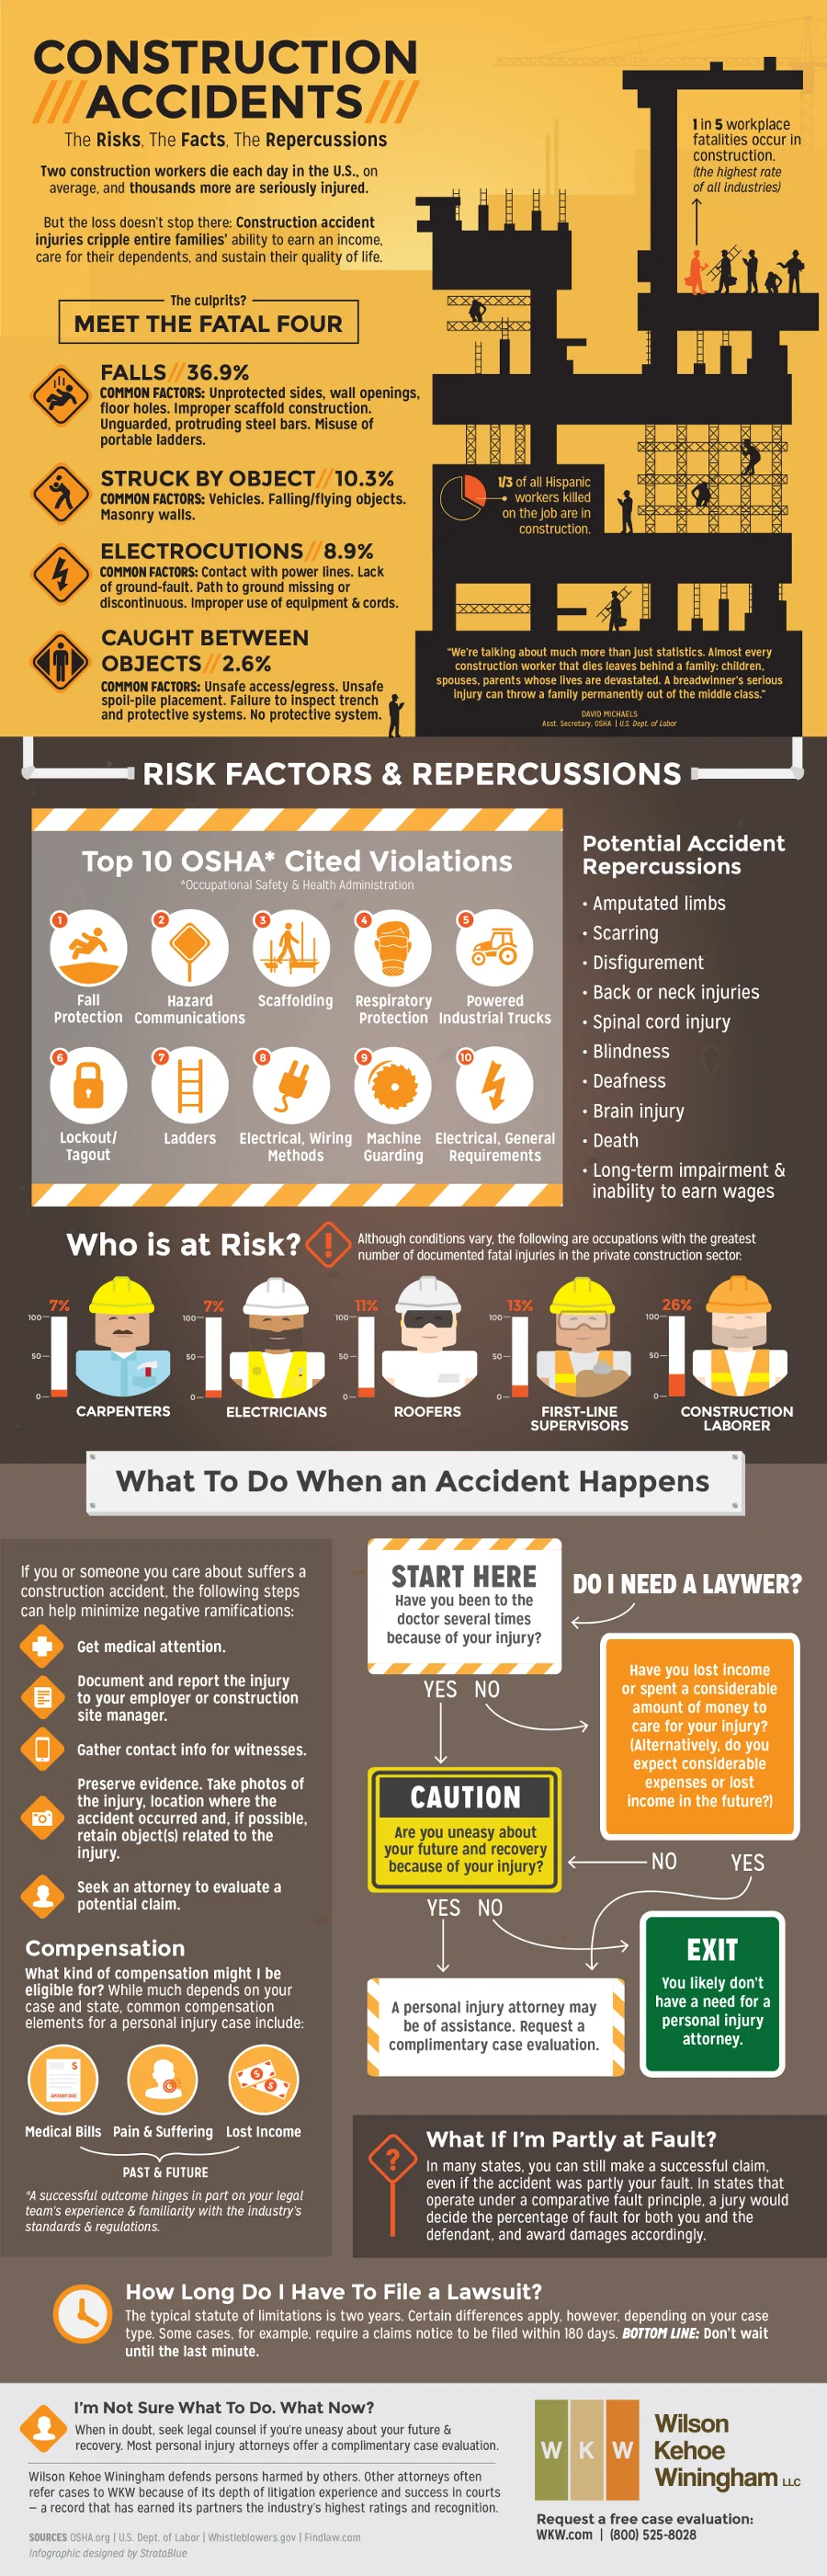 Construction safety infographic